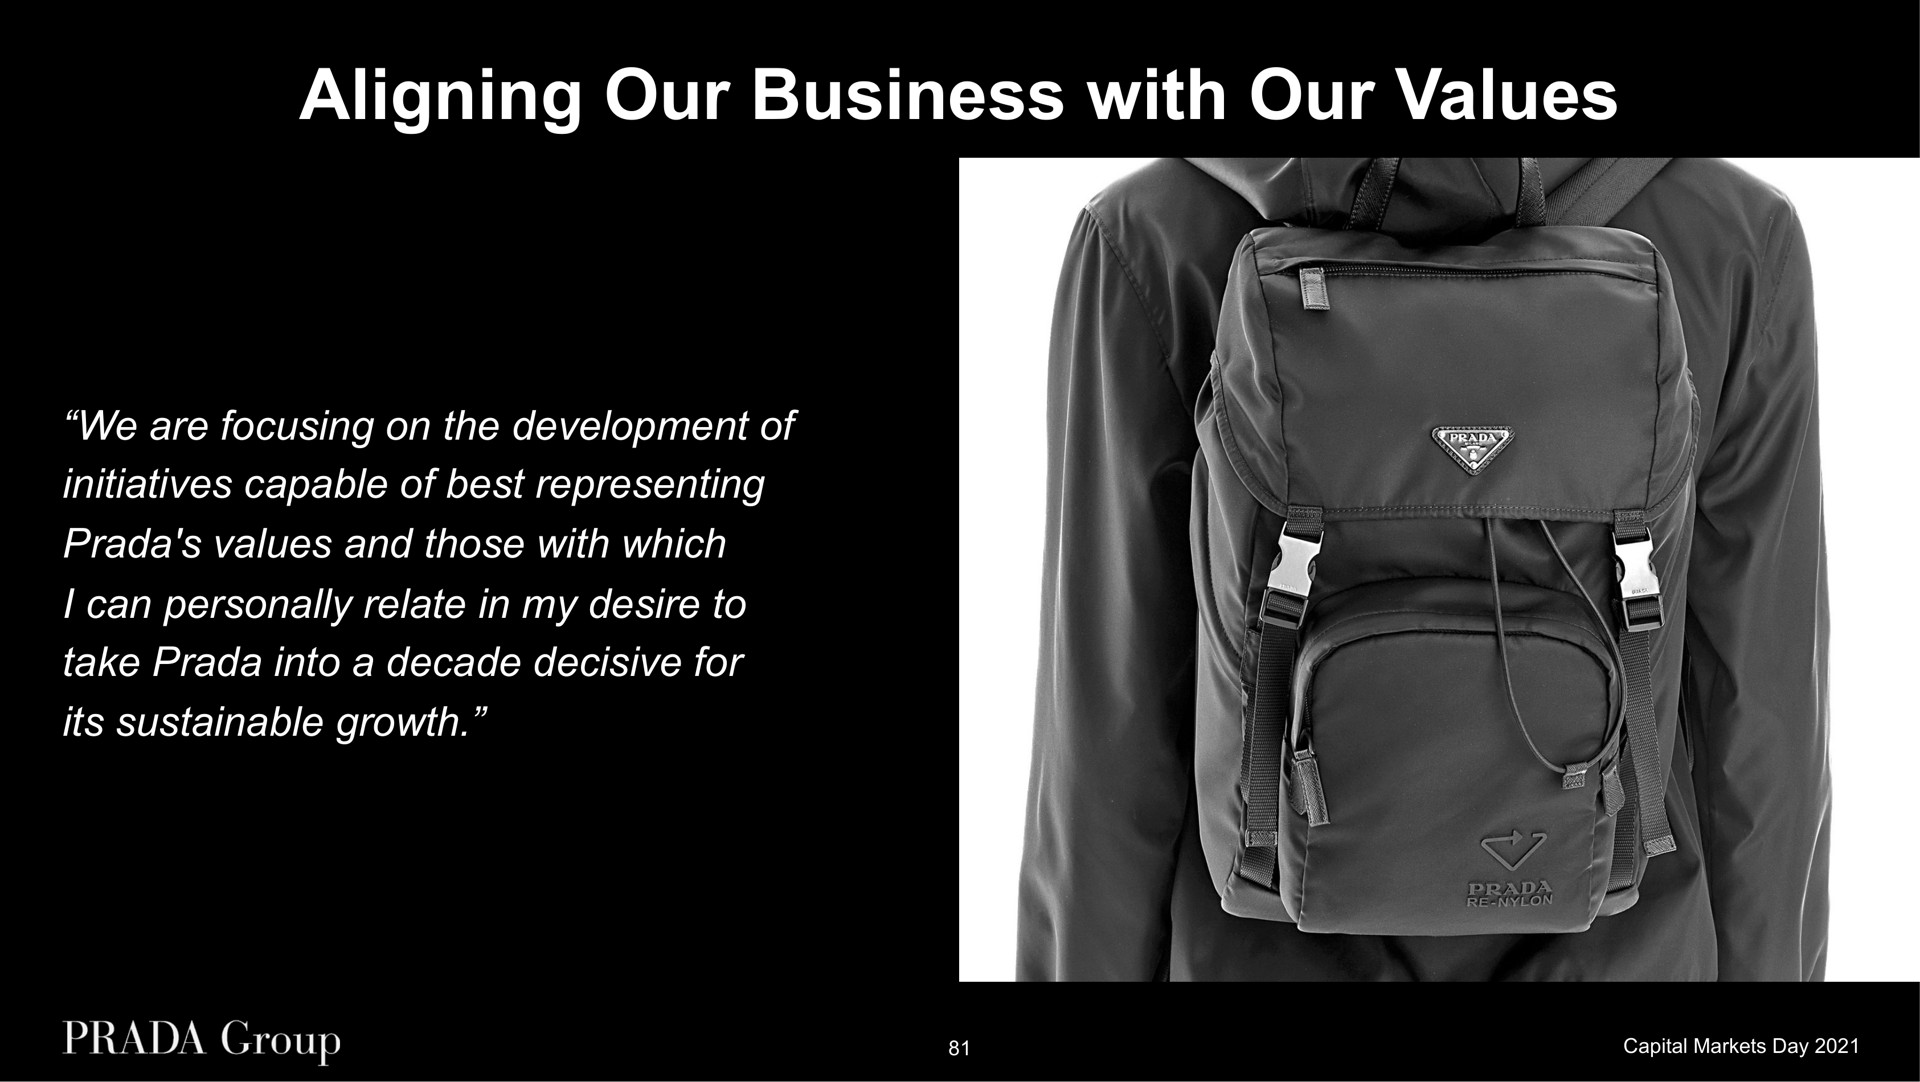 aligning our business with our values we are focusing on the development of initiatives capable of best representing values and those with which i can personally relate in my desire to take into a decade decisive for its sustainable growth | Prada